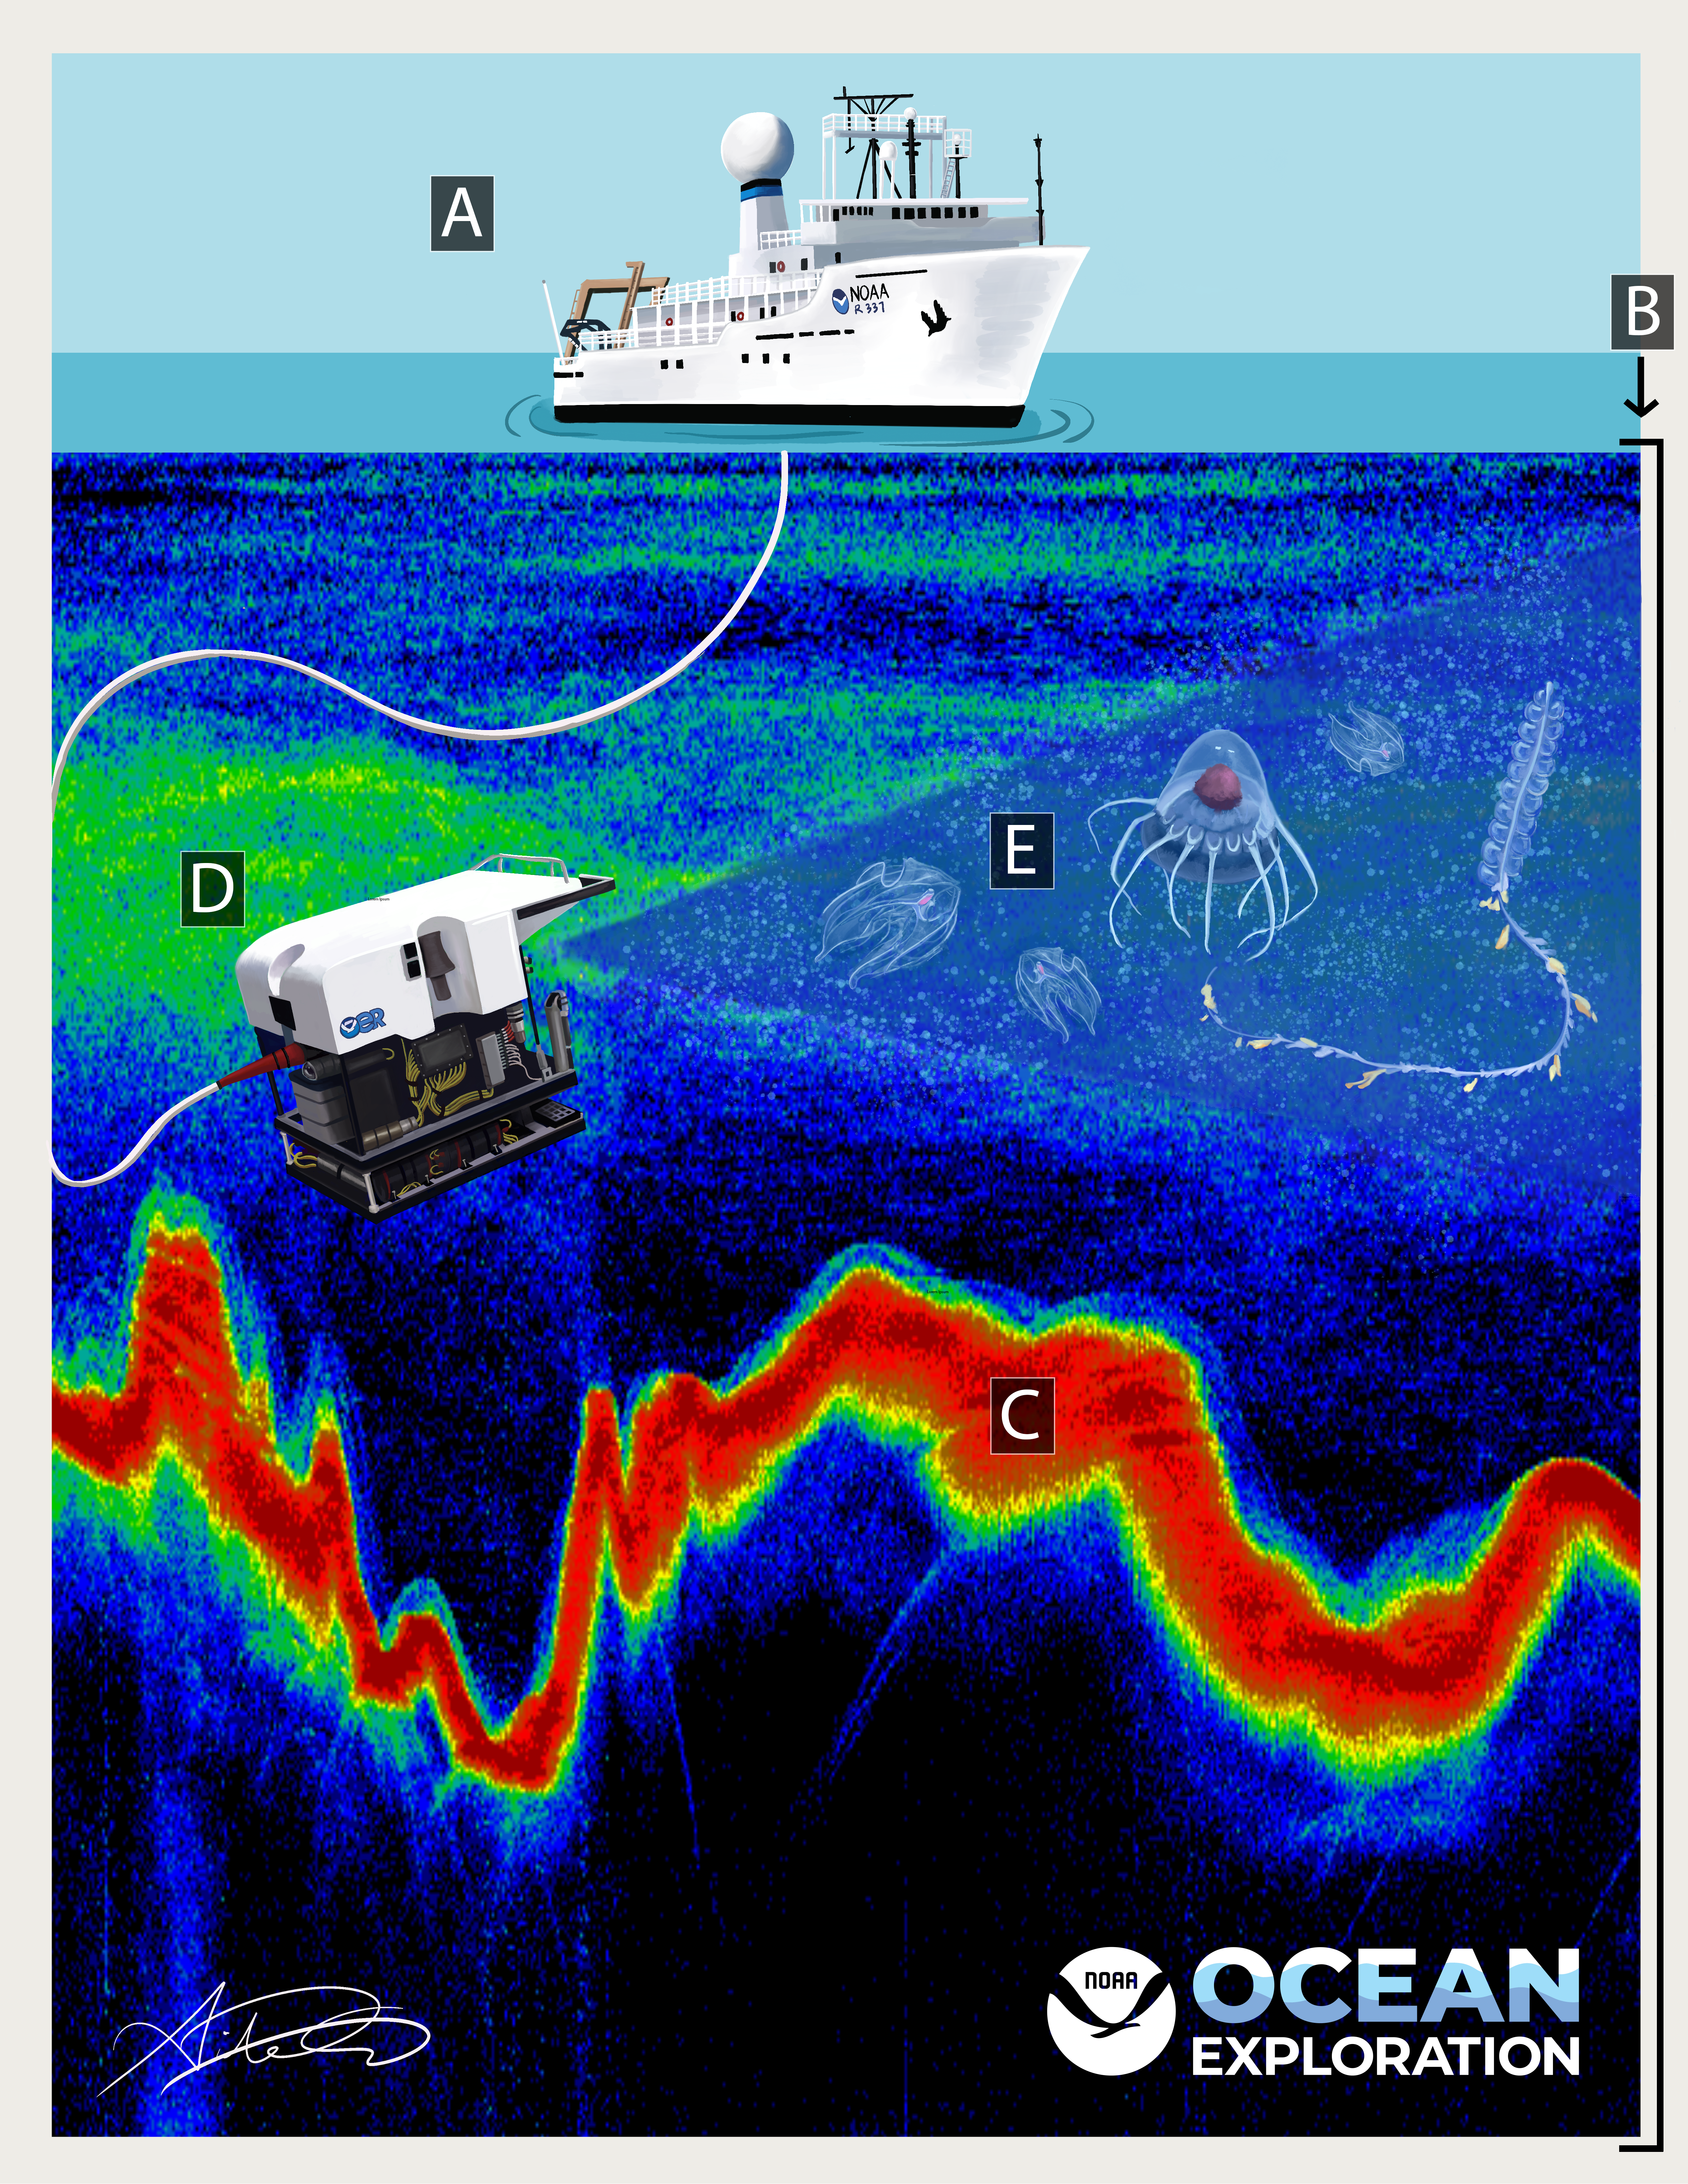 A digitally illustrated poster that shows a water column represented as visually noisy acoustic data (B). On top of the water, a NOAA vessel (A) rests in the water. The deep scattering layer (D) is drawn about a third of the way down the water column. Towards the bottom of the poster, the backscattering response (C) implies sea floor bathymetry that varies in depth. An ROV located in the deep scattering layer is connected by a wire to the NOAA ship. Marine organisms (E) are drawn in the ROVs field of view.